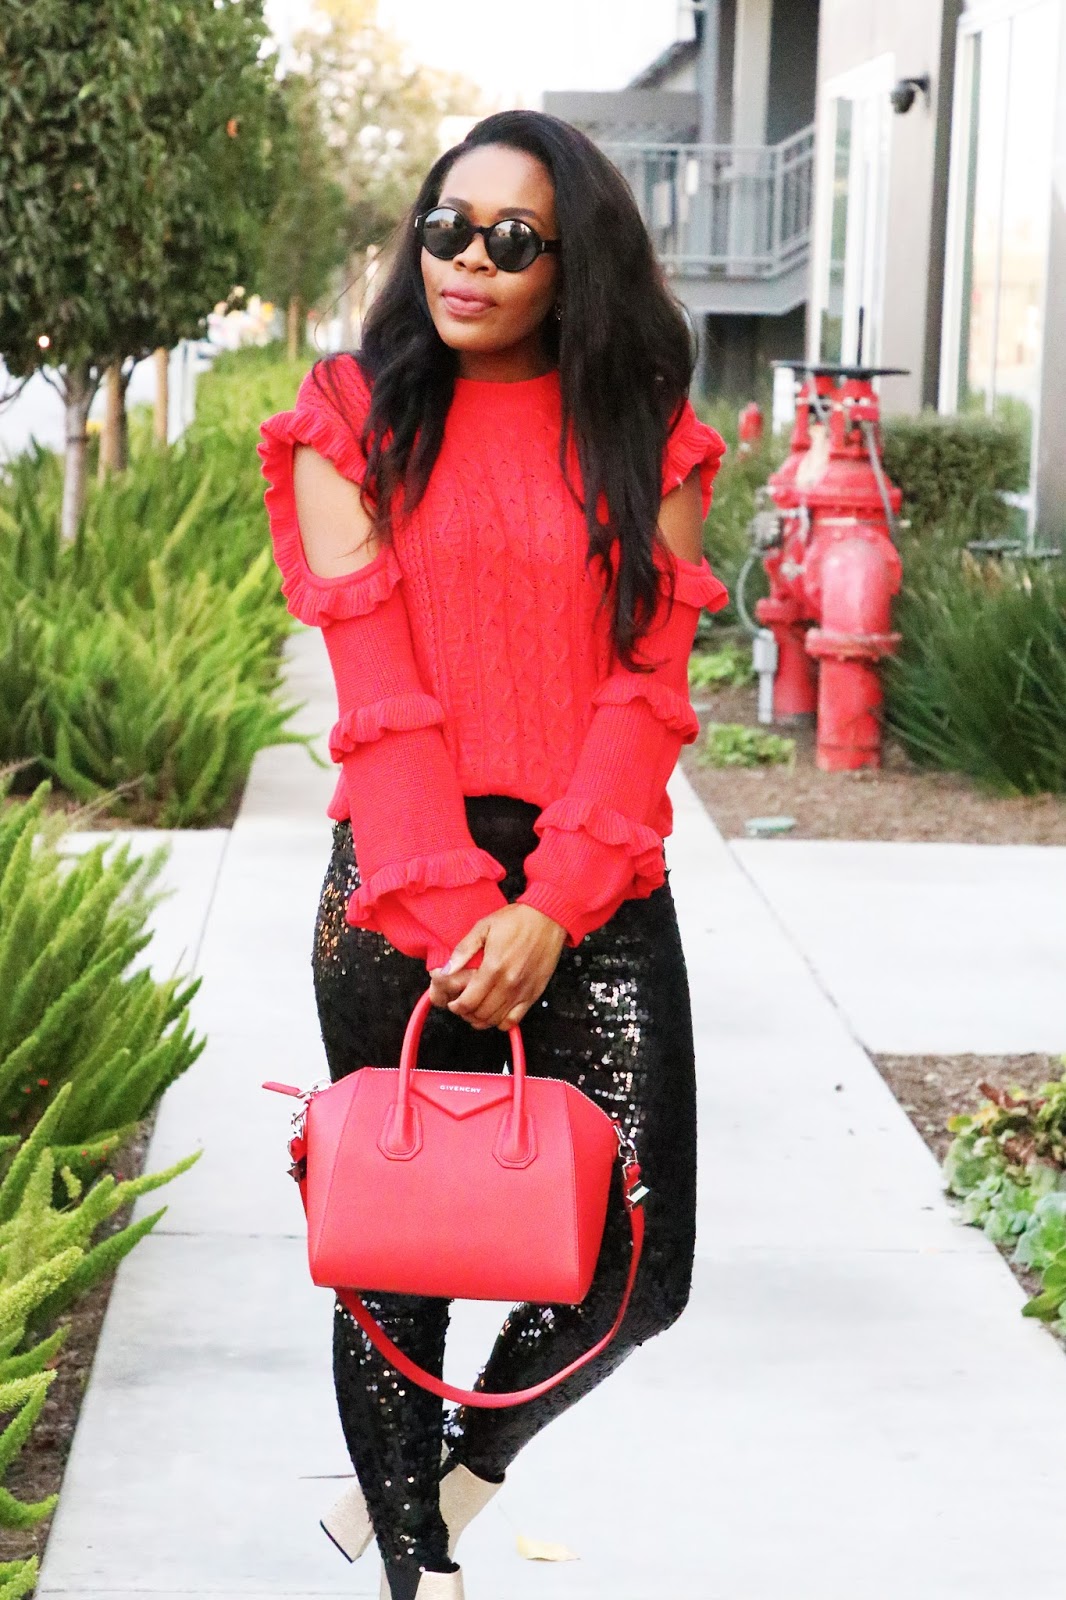 Expressing My Style With Sequin and Cold-Shoulder This Holiday | STYLE ...